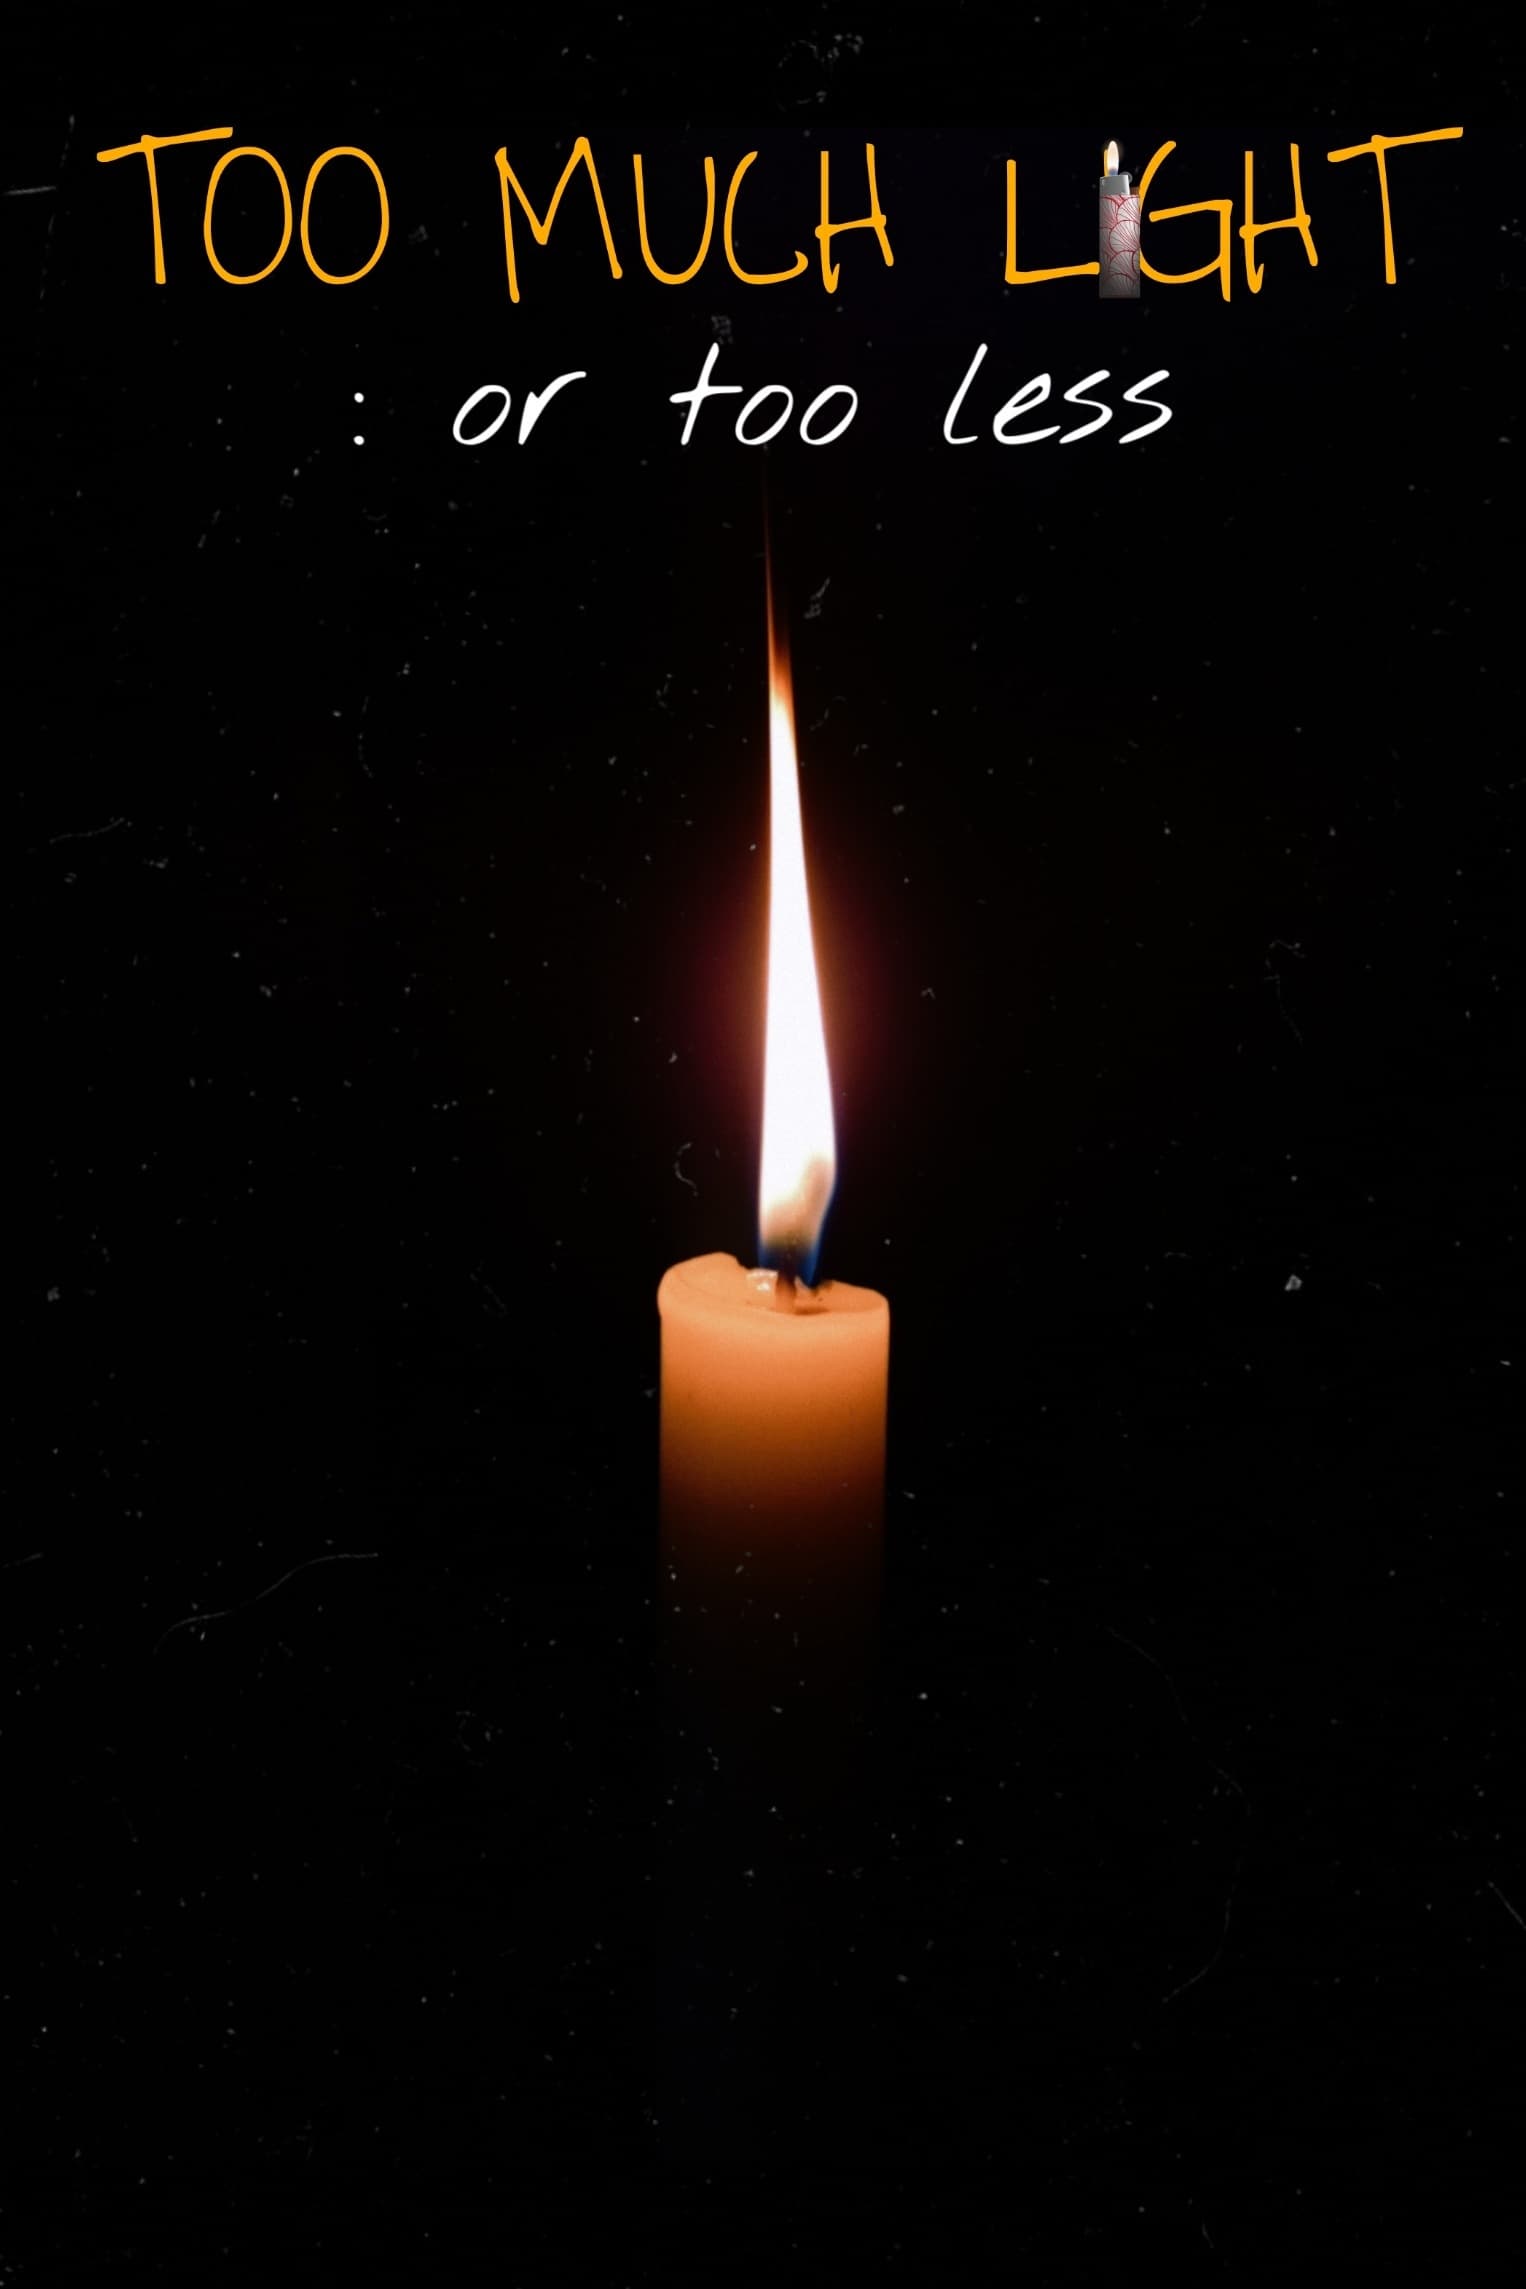 Too Much Light :or Too Less